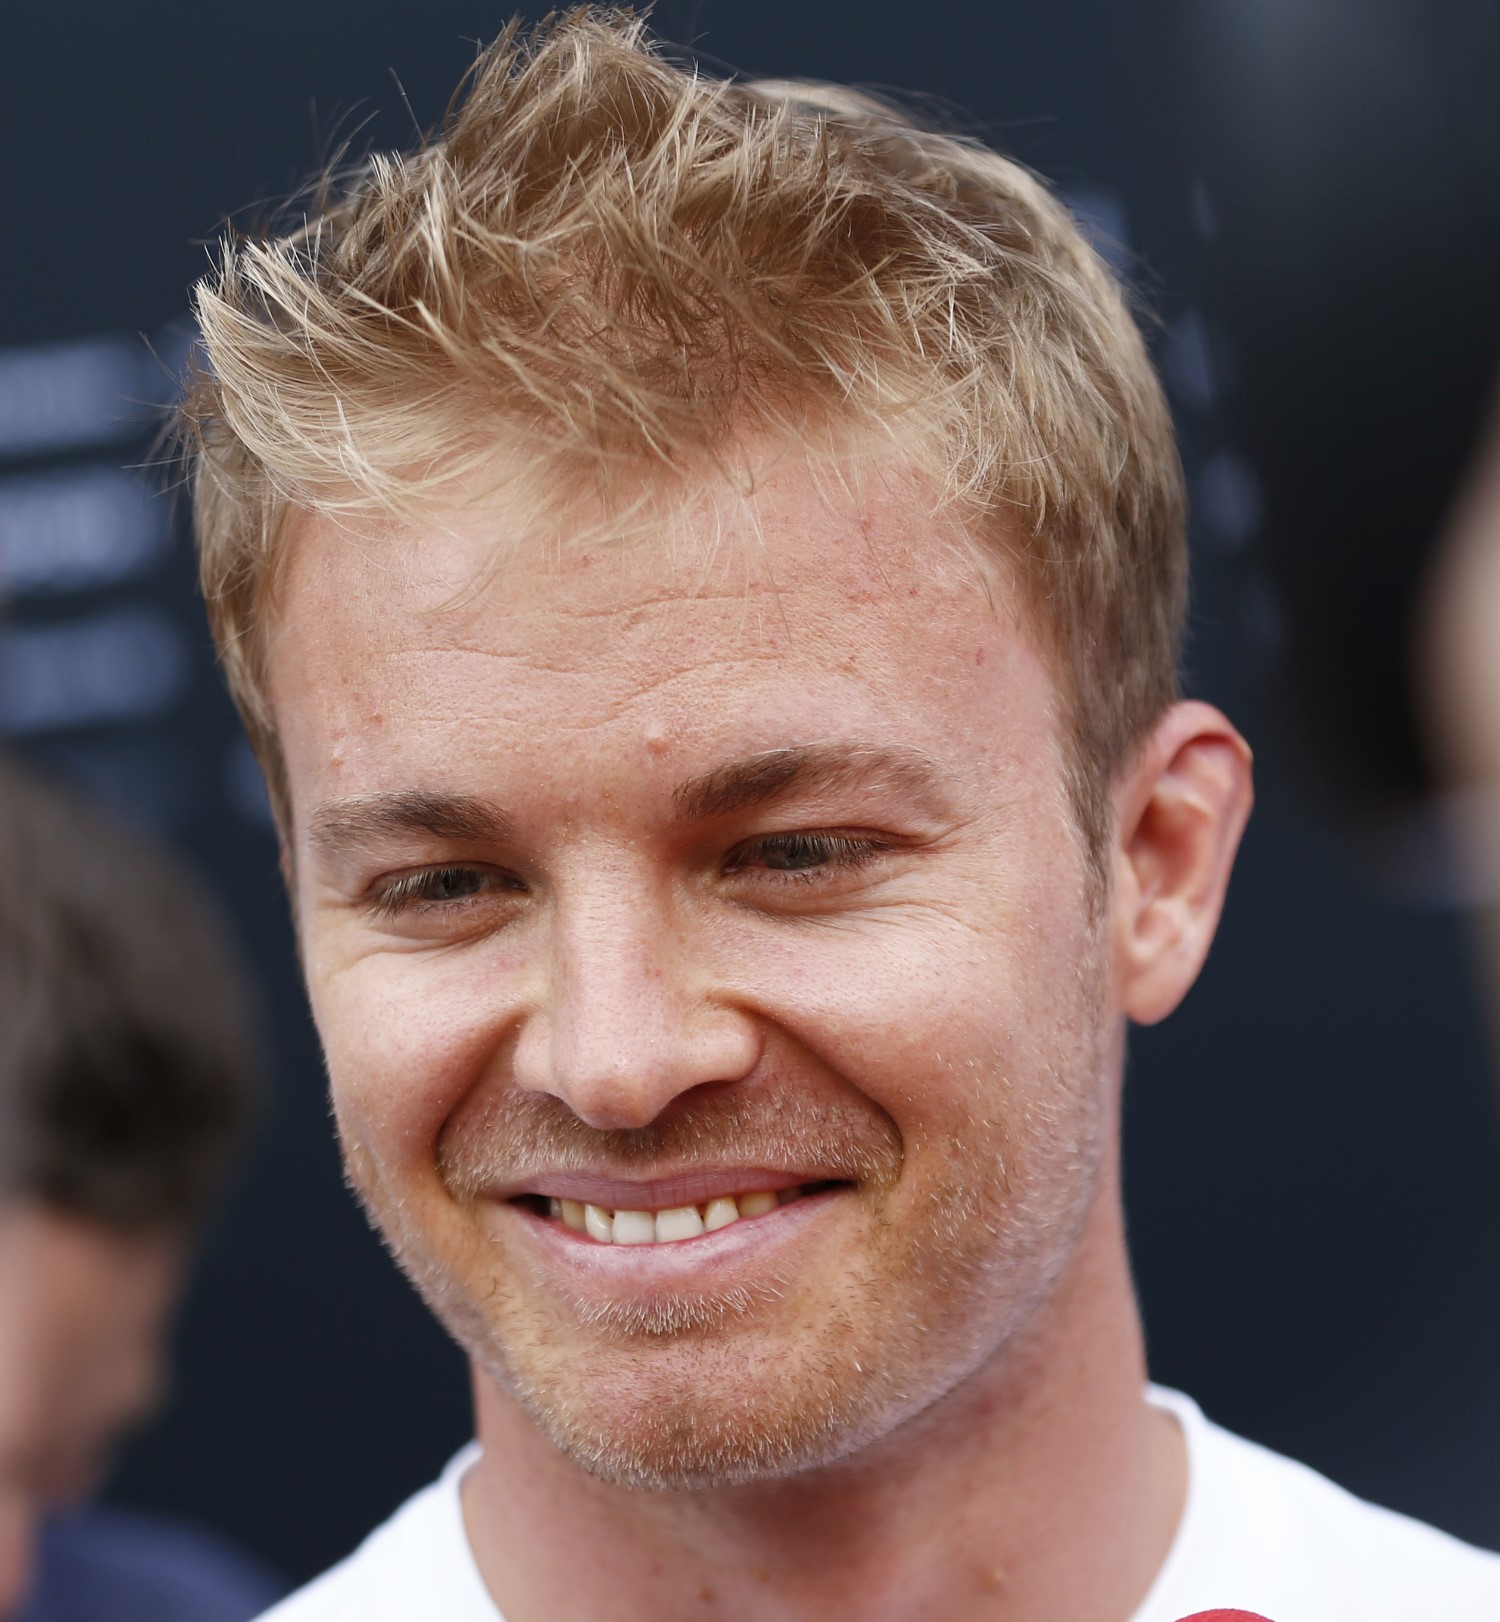 Rosberg is rumored to want to try his hand at acting, and now as a driver manager